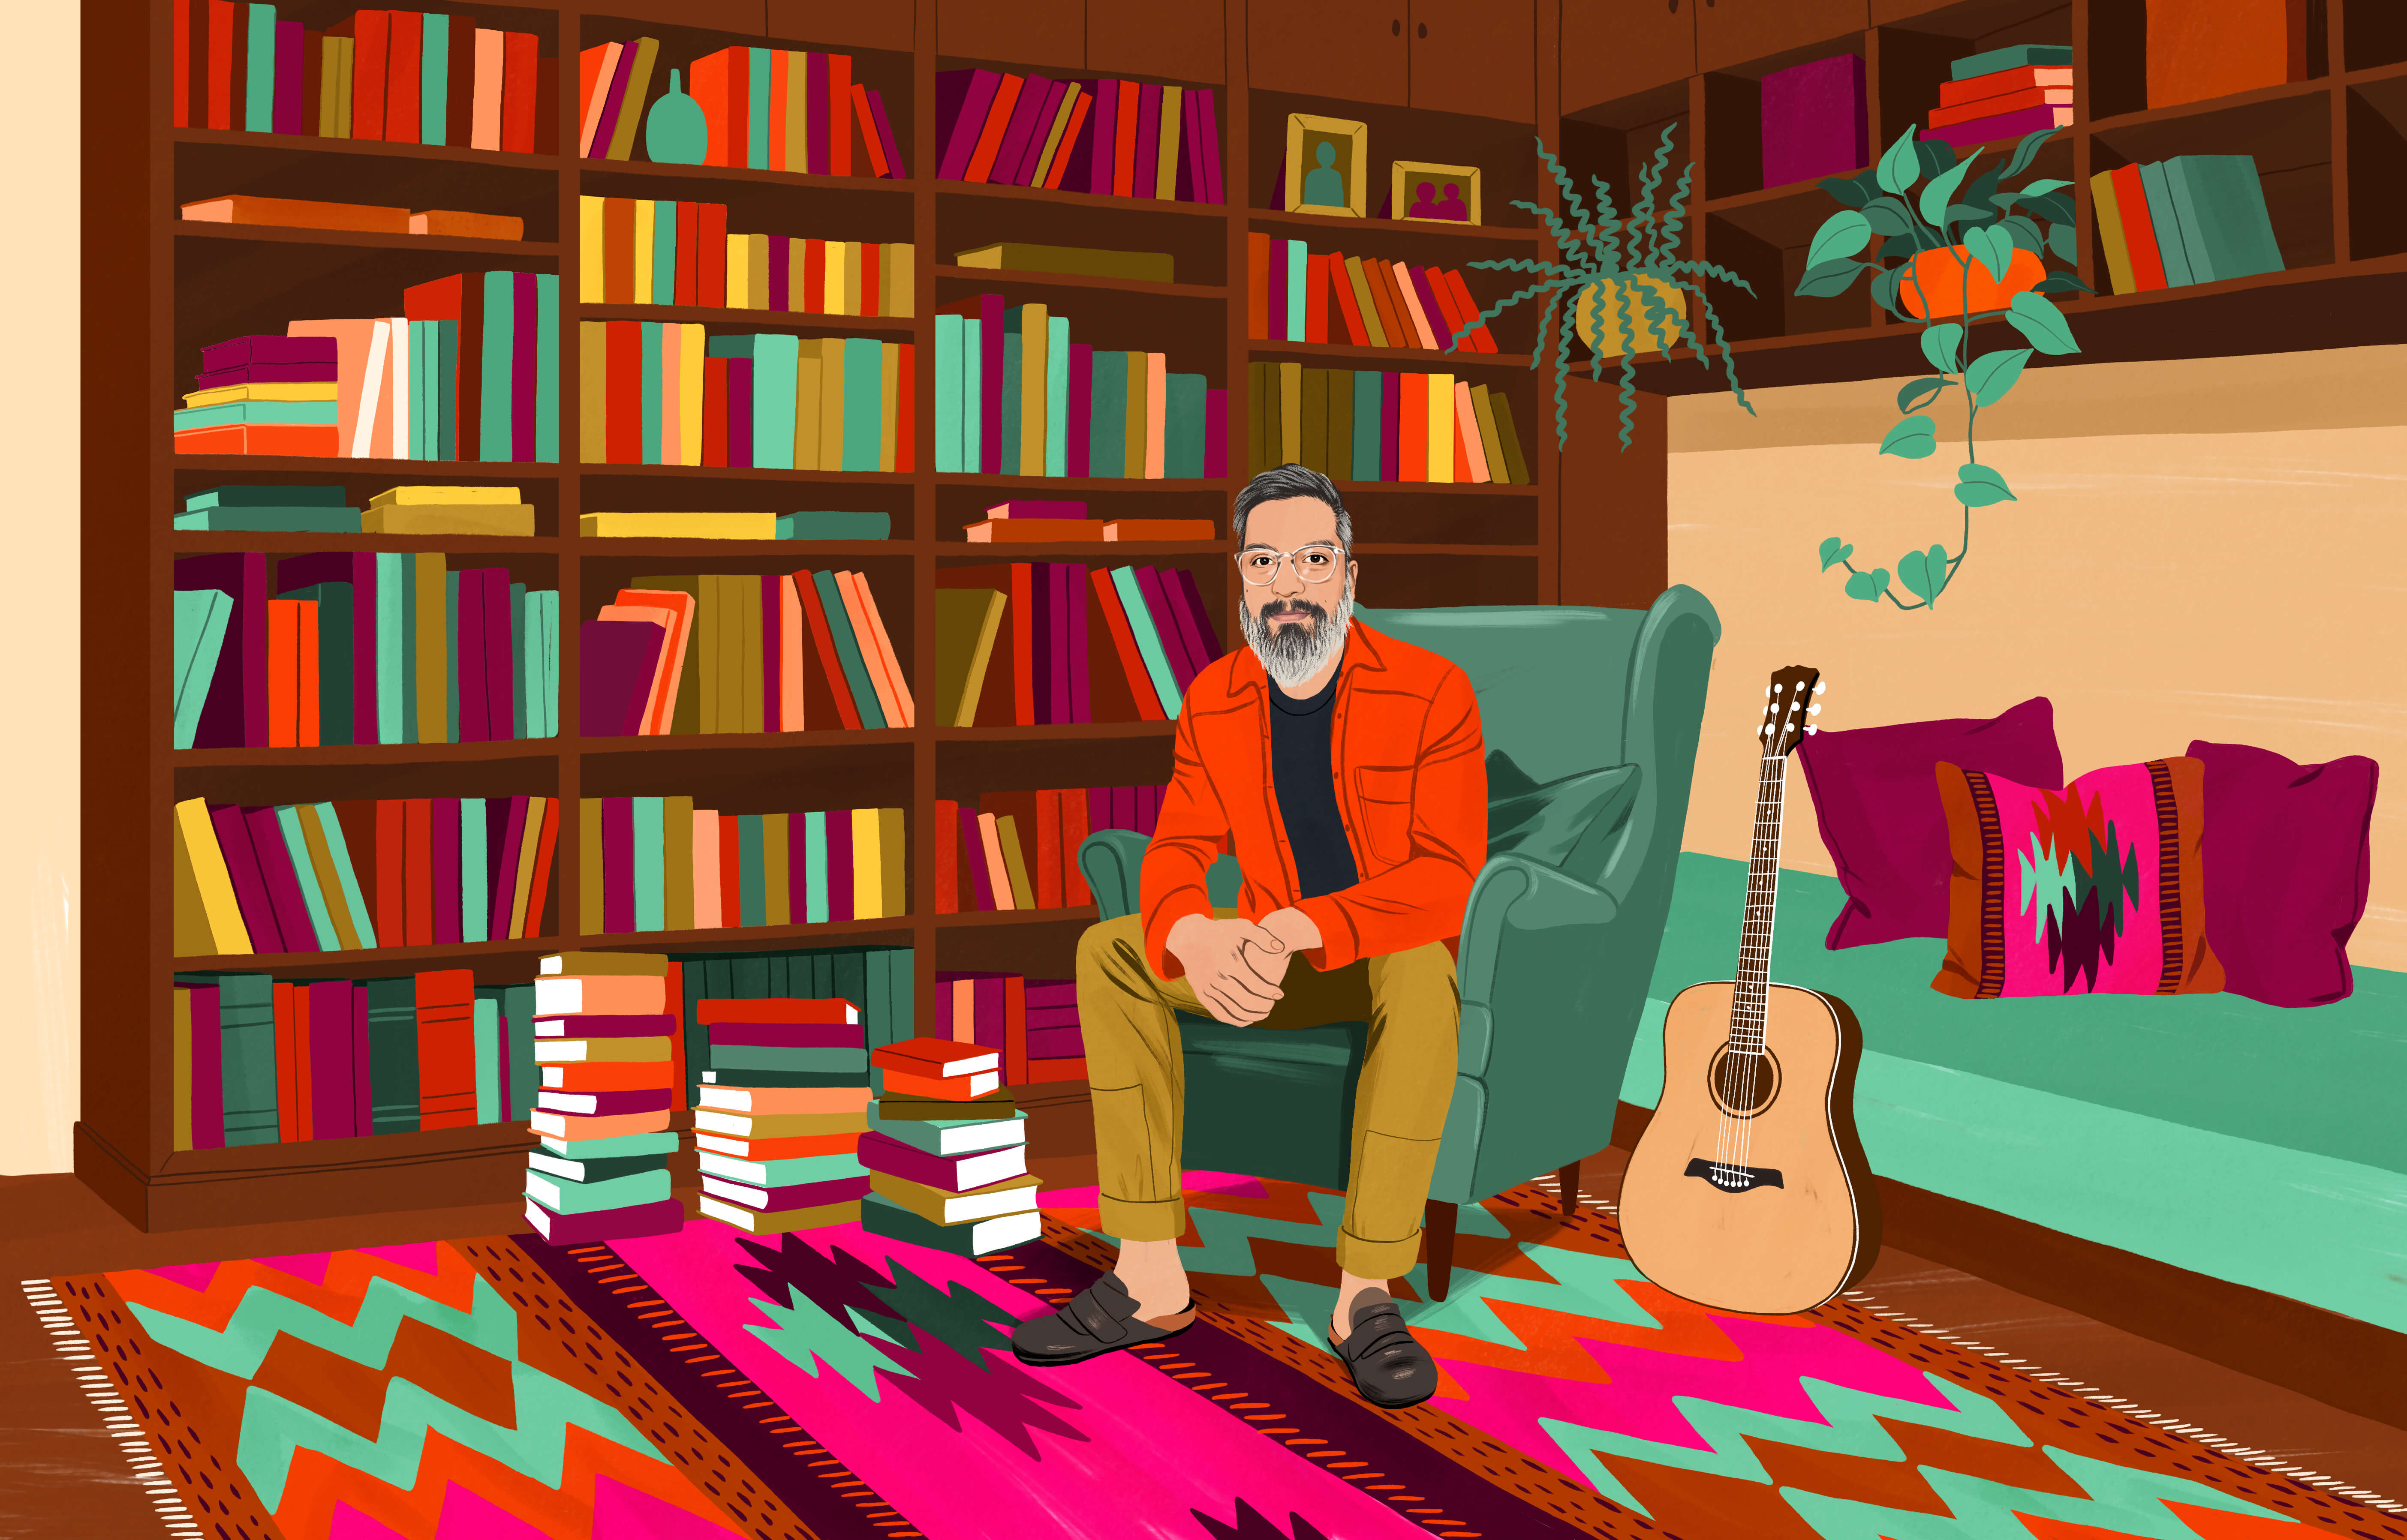 JP sitting in a wingback chair surrounded by many books in bookcases and stacked high on the floor. On the floor is a traditional Chilean rug with a colorful pattern. An acoustic guitar is within arm’s reach.